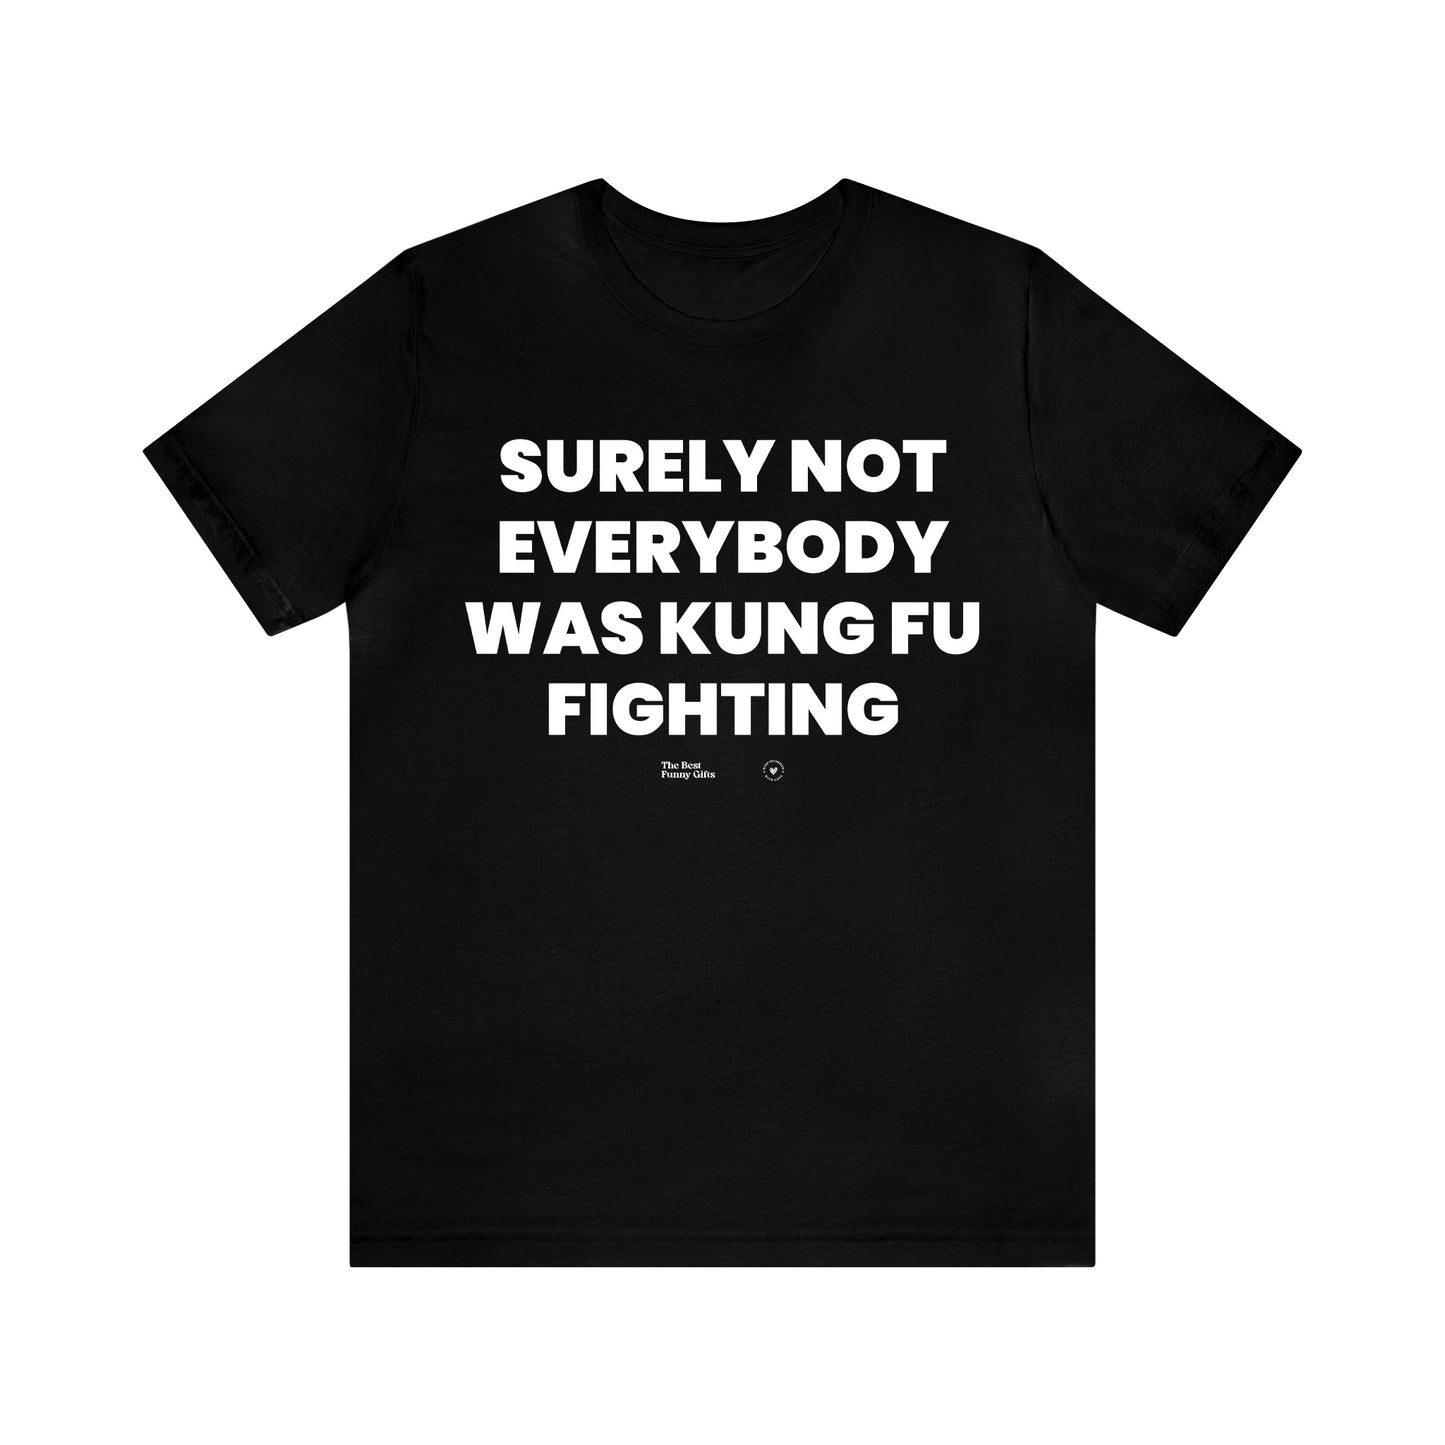 Mens T Shirts - Surely Not Everybody Was Kung Fu Fighting - Funny Men T Shirts